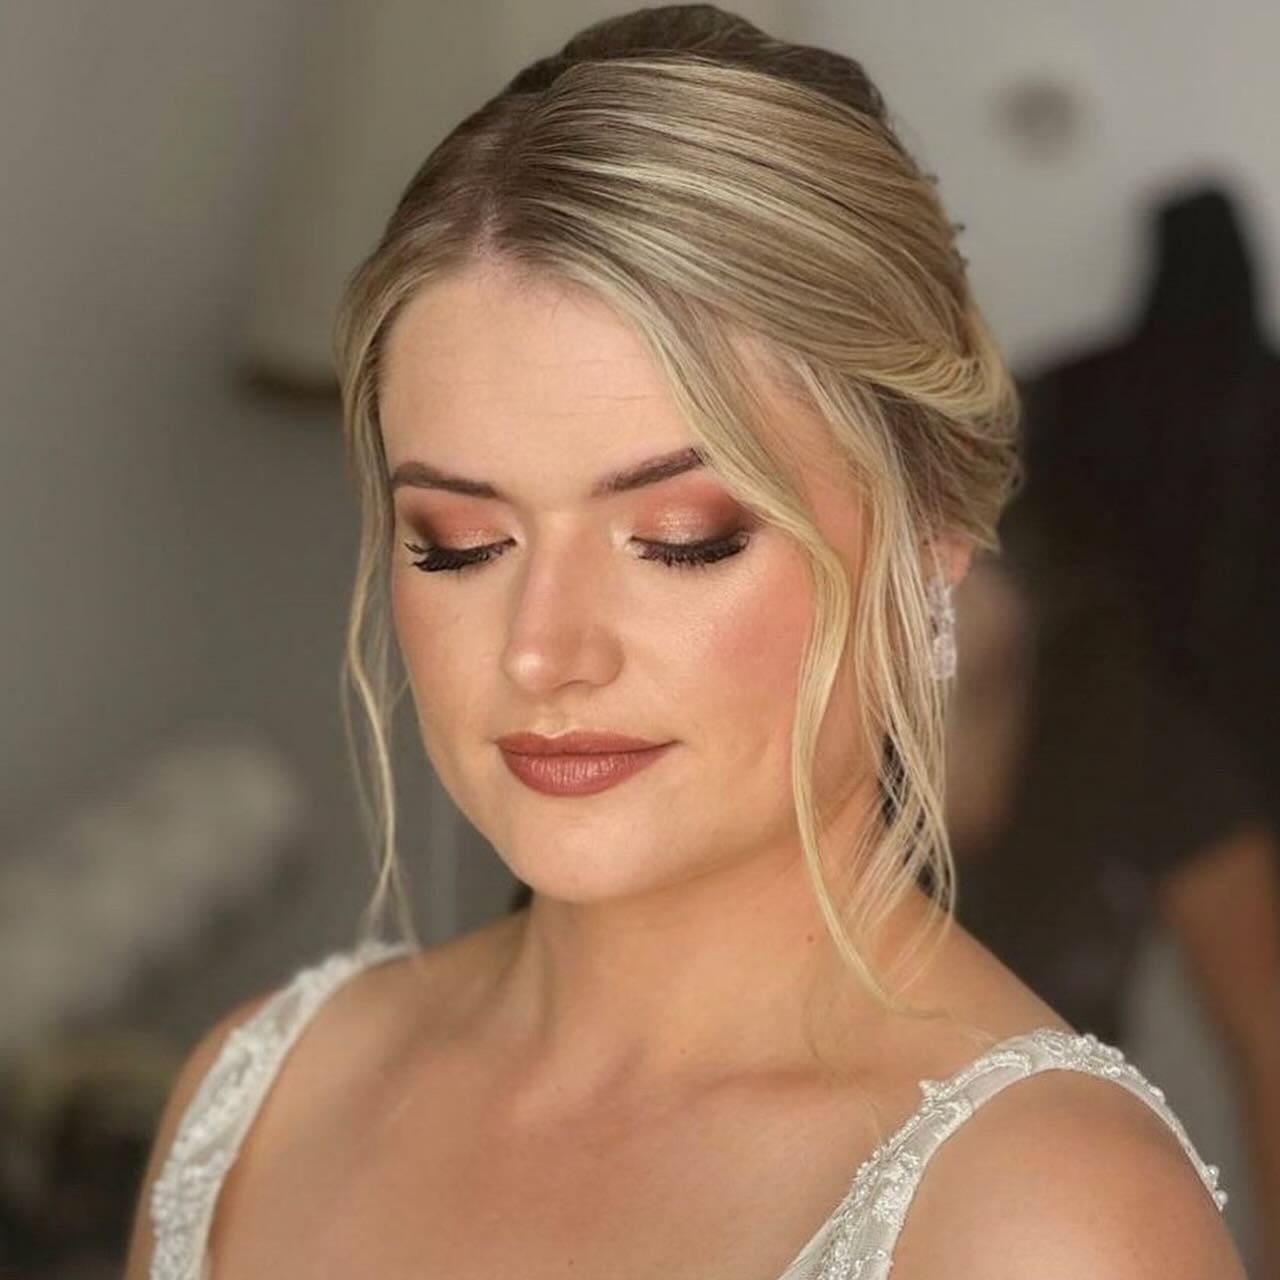 👰 Amanda's Amalfi Fairytale 💍 Bringing out her inner radiance for the most special day. Cheers to love and a lifetime of adventures! 🥂✨ 
.
.
I used @charlottetilbury @schwarzkopfpro @sweedbeauty
.
.
#WeddingHair #BridalMakeup #amalficoastwedding #